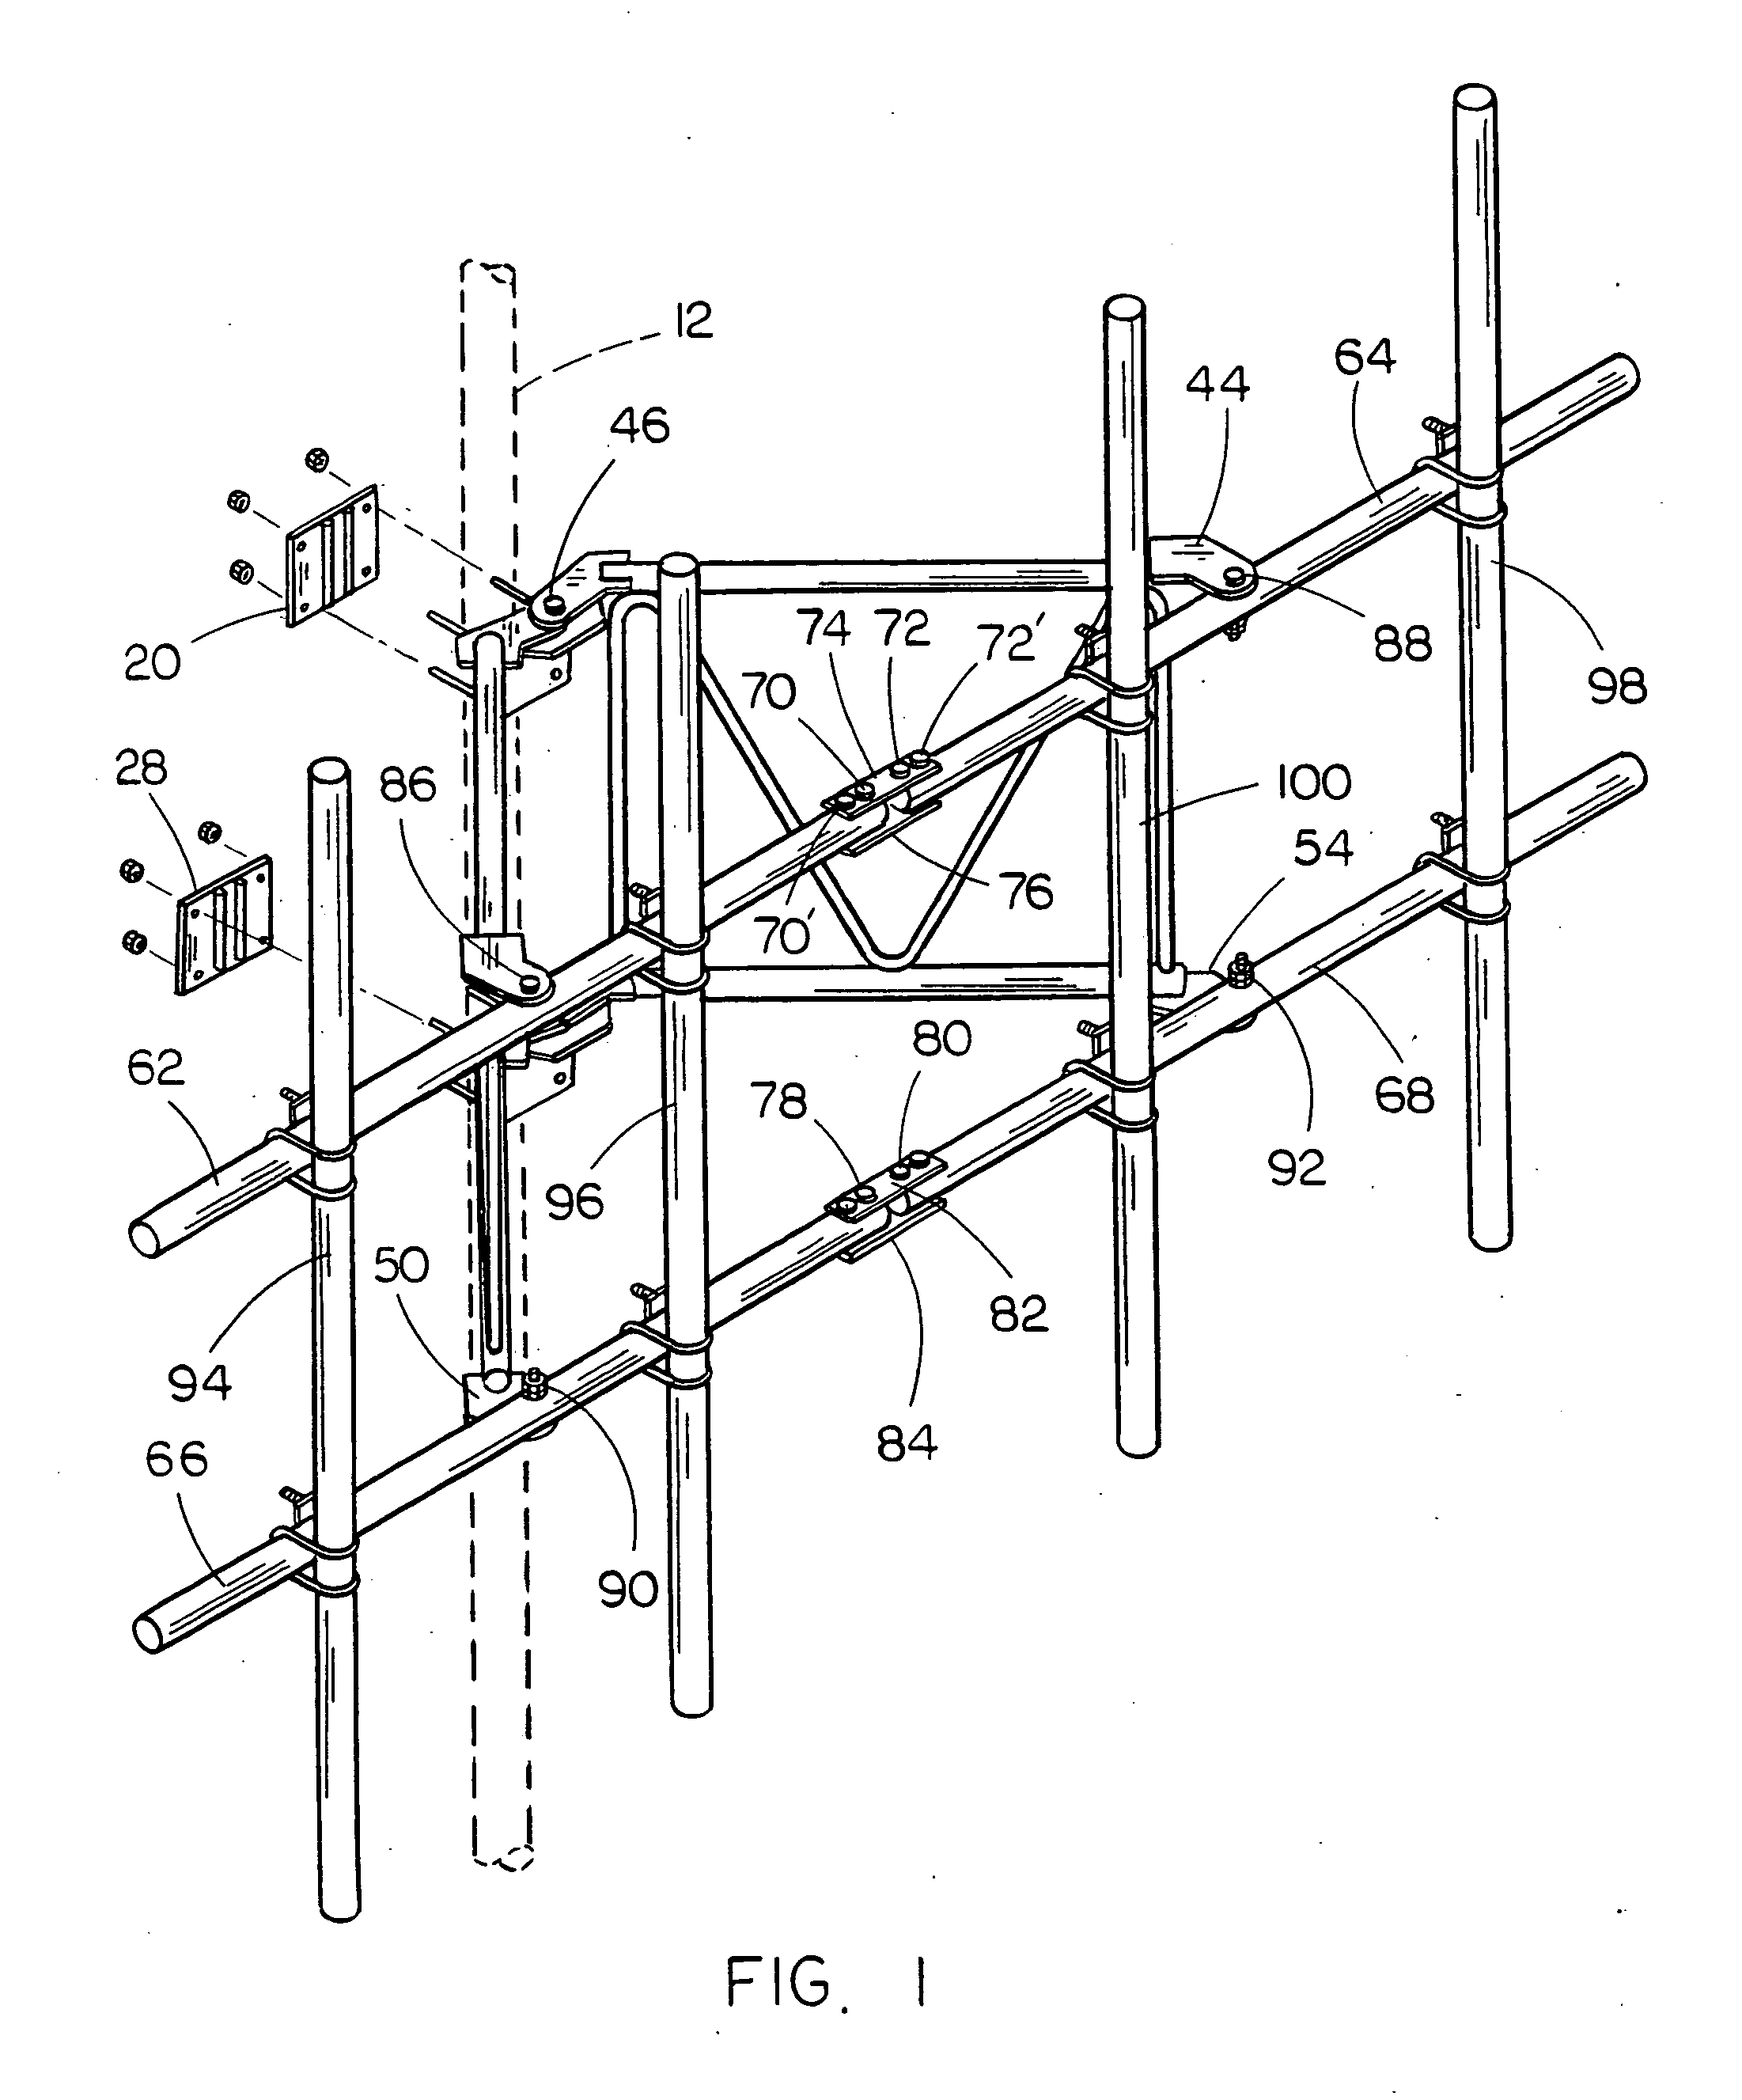 Folding frame for mounting an antenna